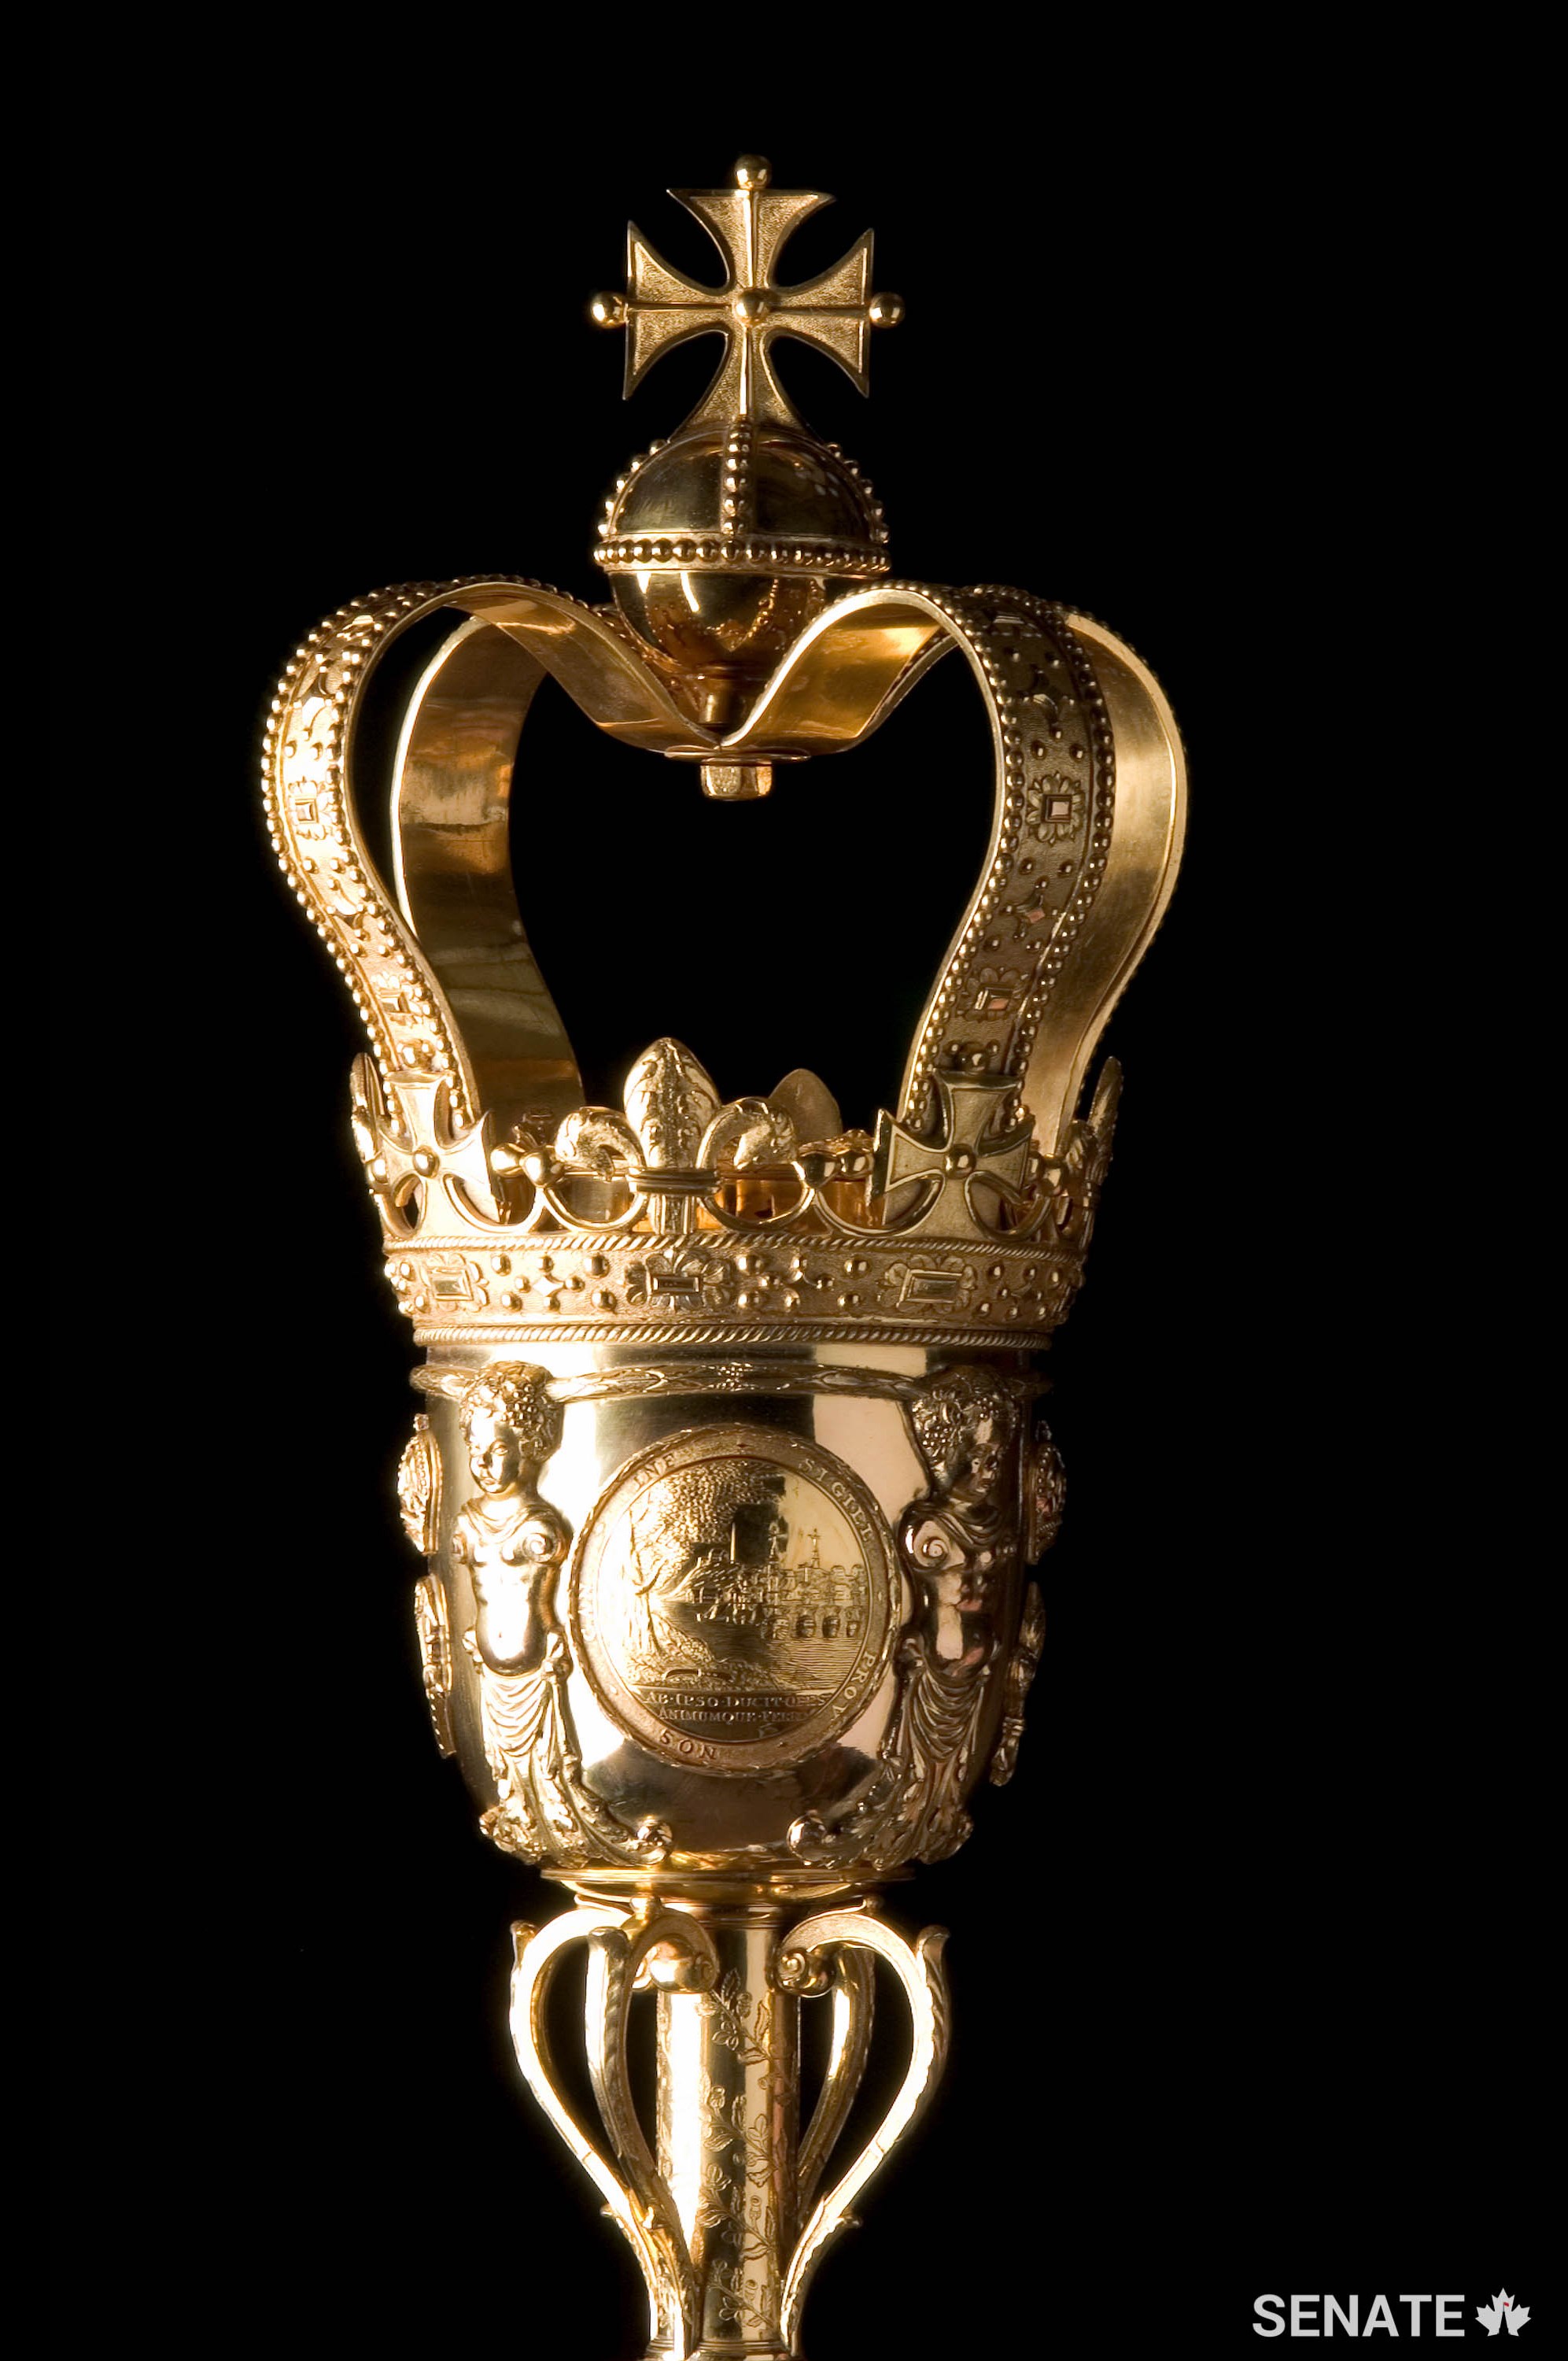 The 1.6-metre gold-plated brass Senate Mace weighs approximately 11 kilograms and symbolizes the monarch’s authority in the Senate of Canada.